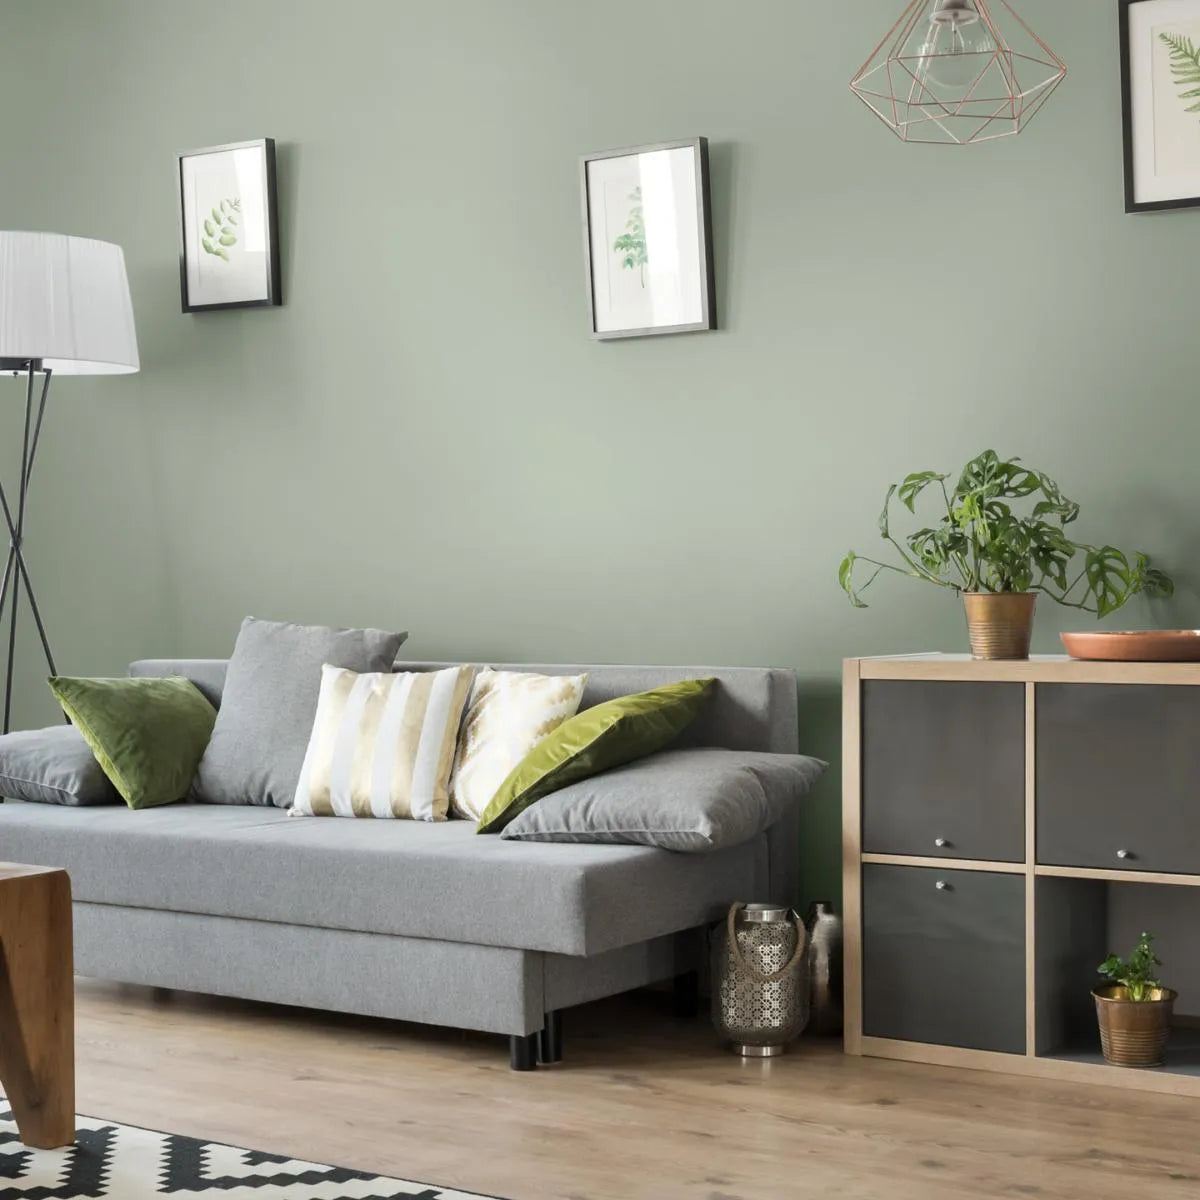 Colourtrend Schoolroom Green | Same Day Dublin and Nationwide Paint in Ireland Delivery by Weirs of Baggot Street - Official Colourtrend Stockist